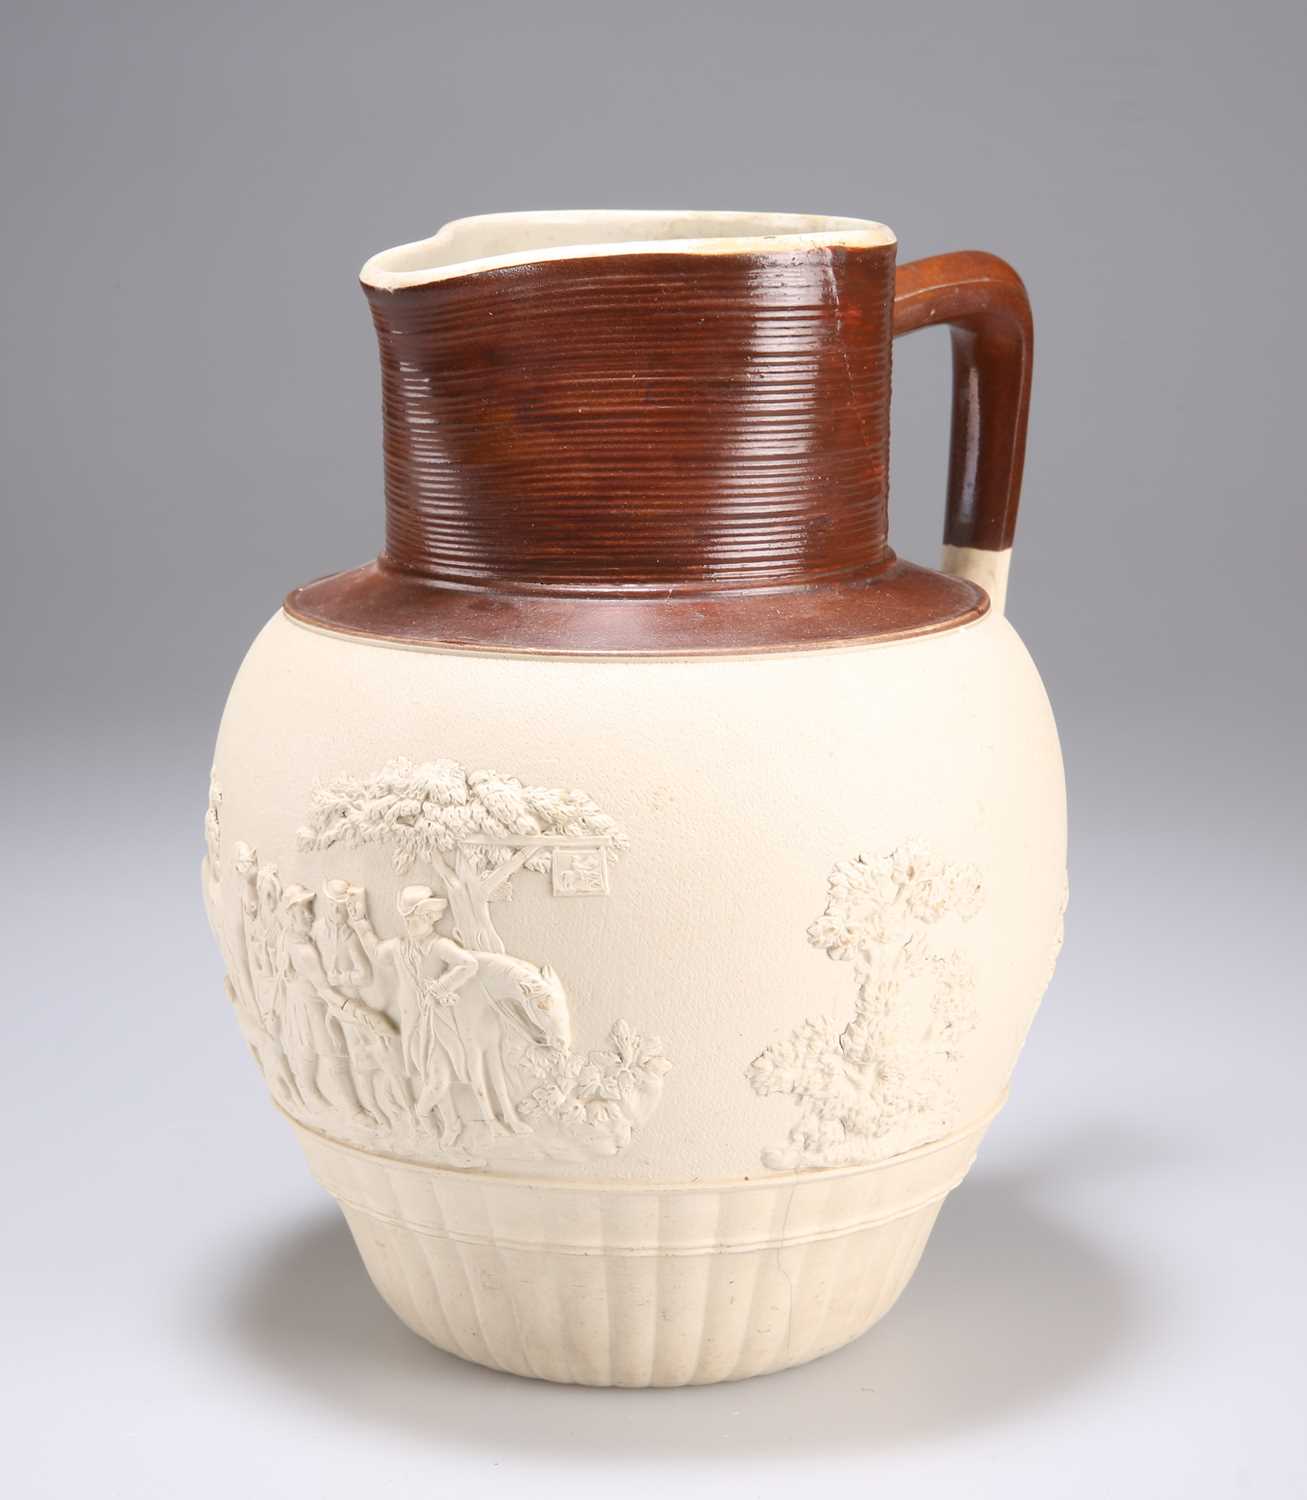 A DRY-BODIED STONEWARE JUG, BY TURNER